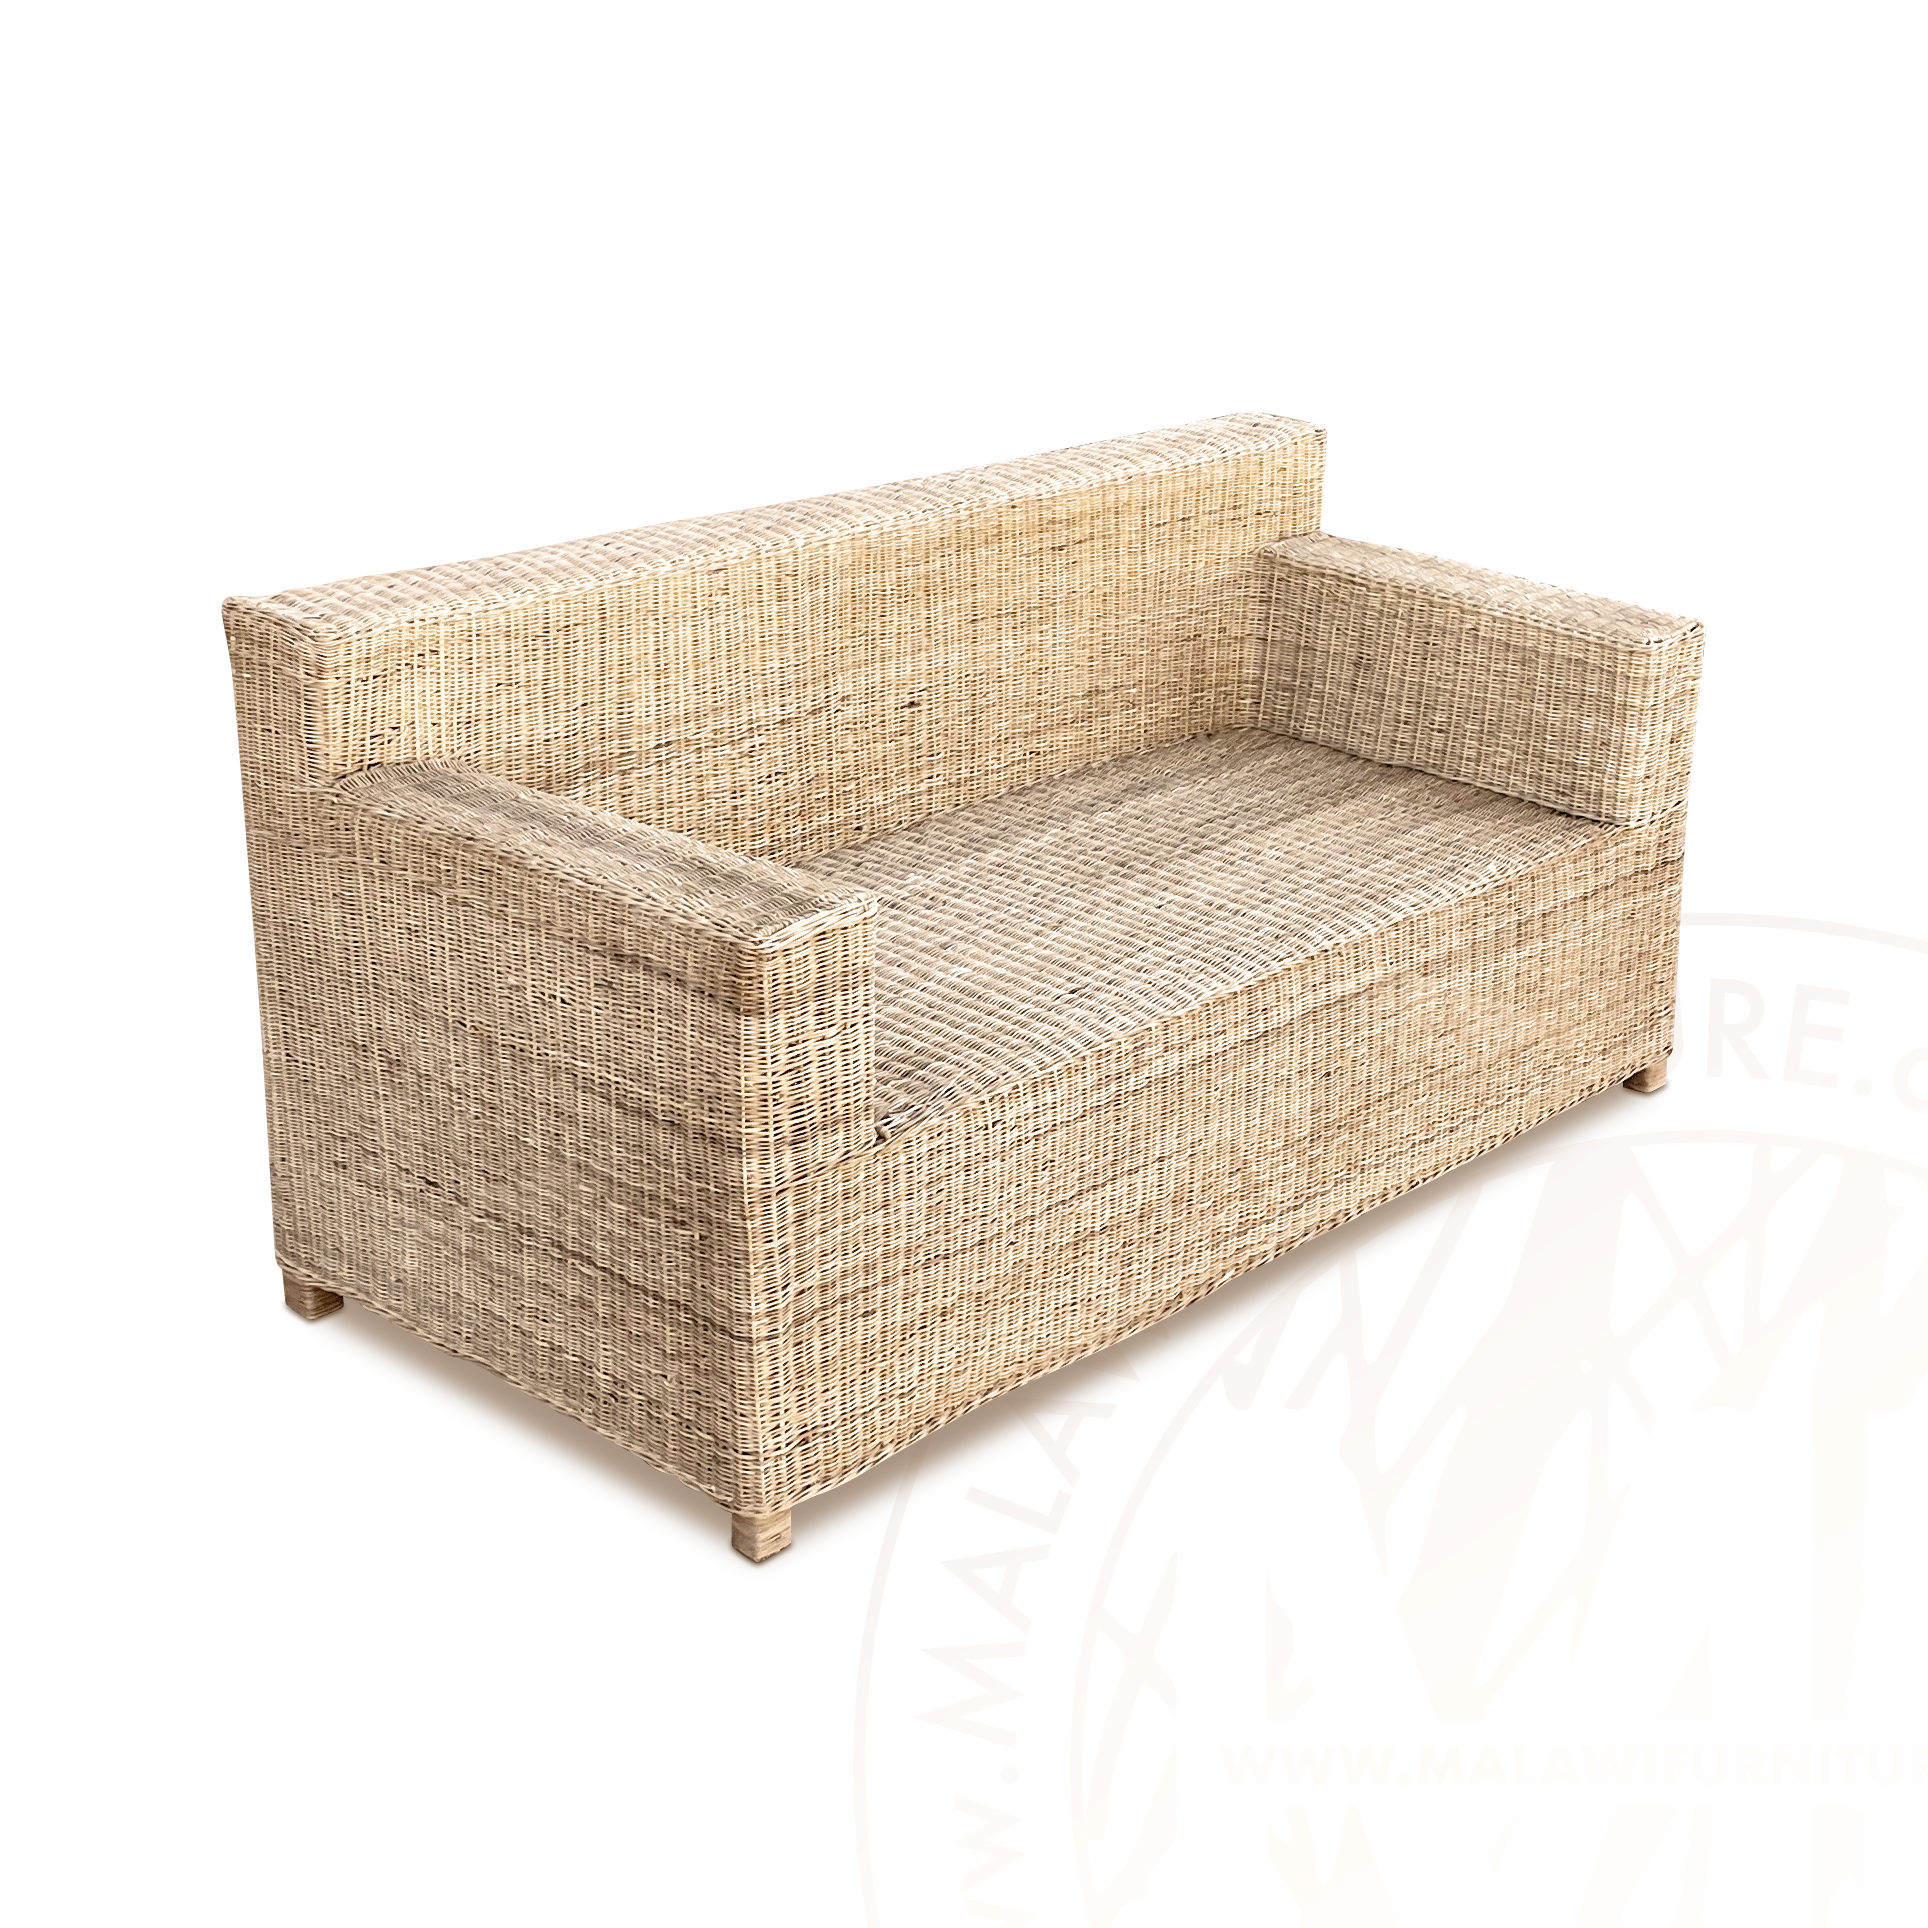 BOX Malawi Couch – Two Seater hand weaved woven rattan cane chair malawi patio outdoor